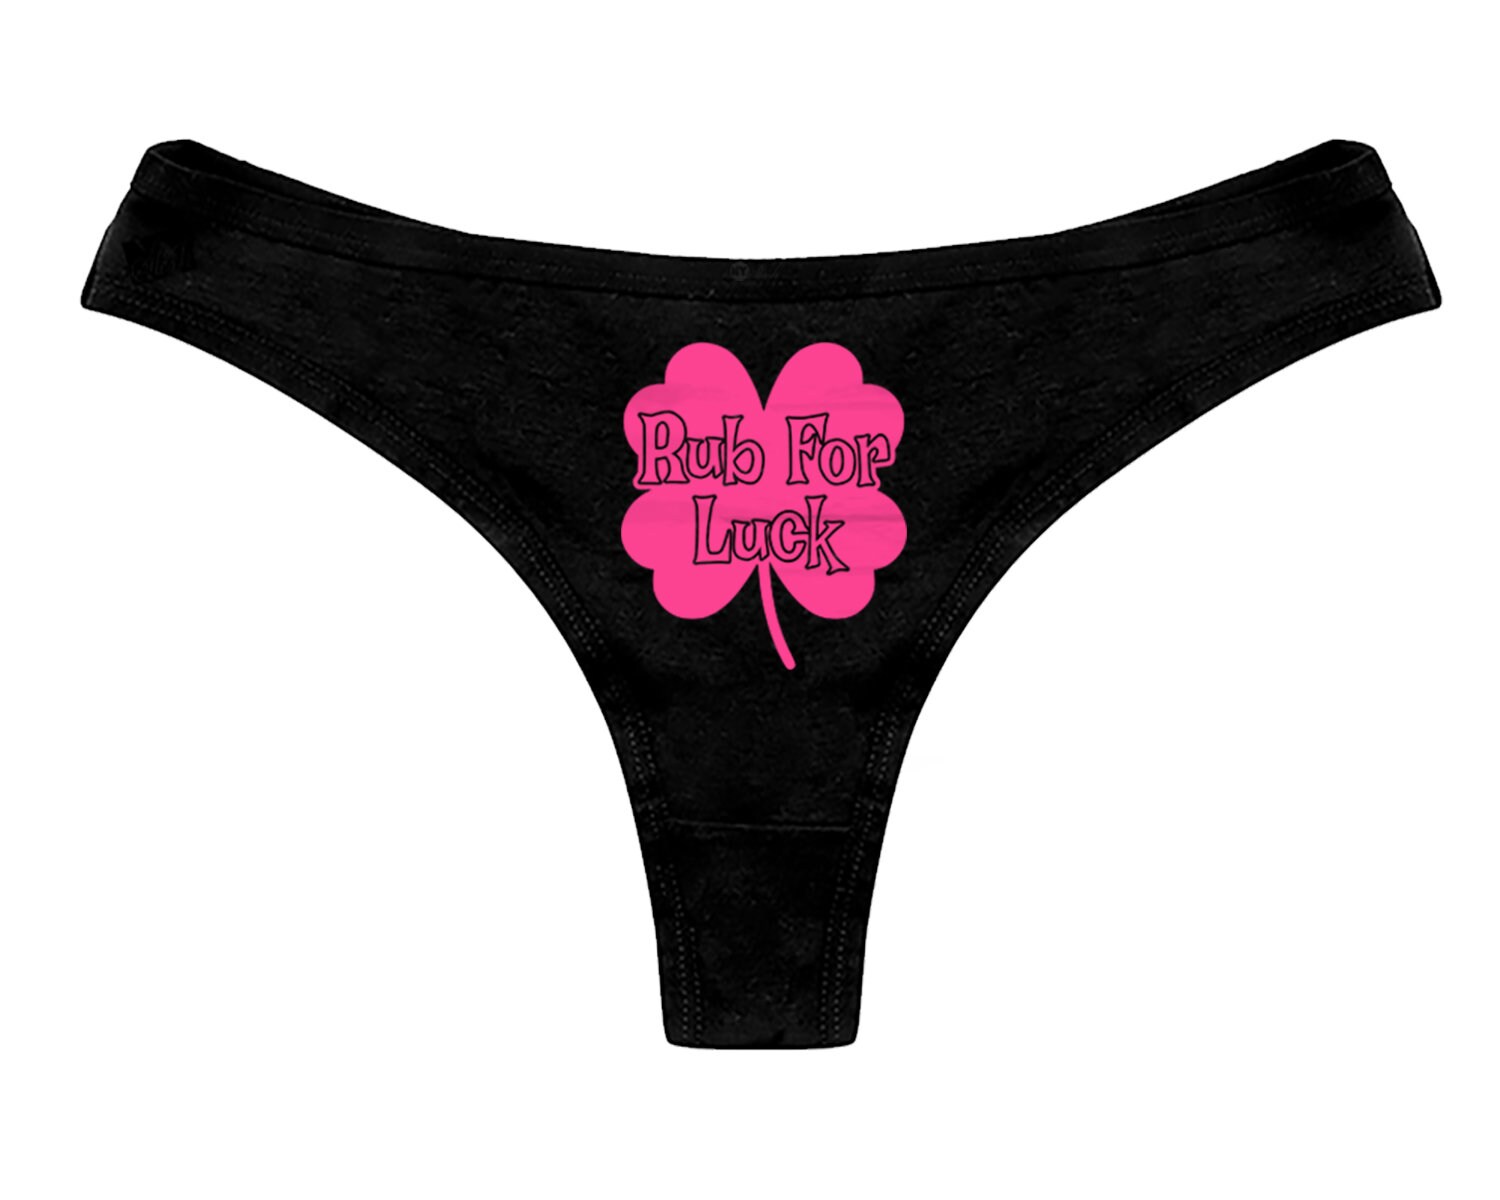 Rub For Luck Clover Panties St Patricks Day Funny Irish Sexy Naughty Bachelorette Party Bridal